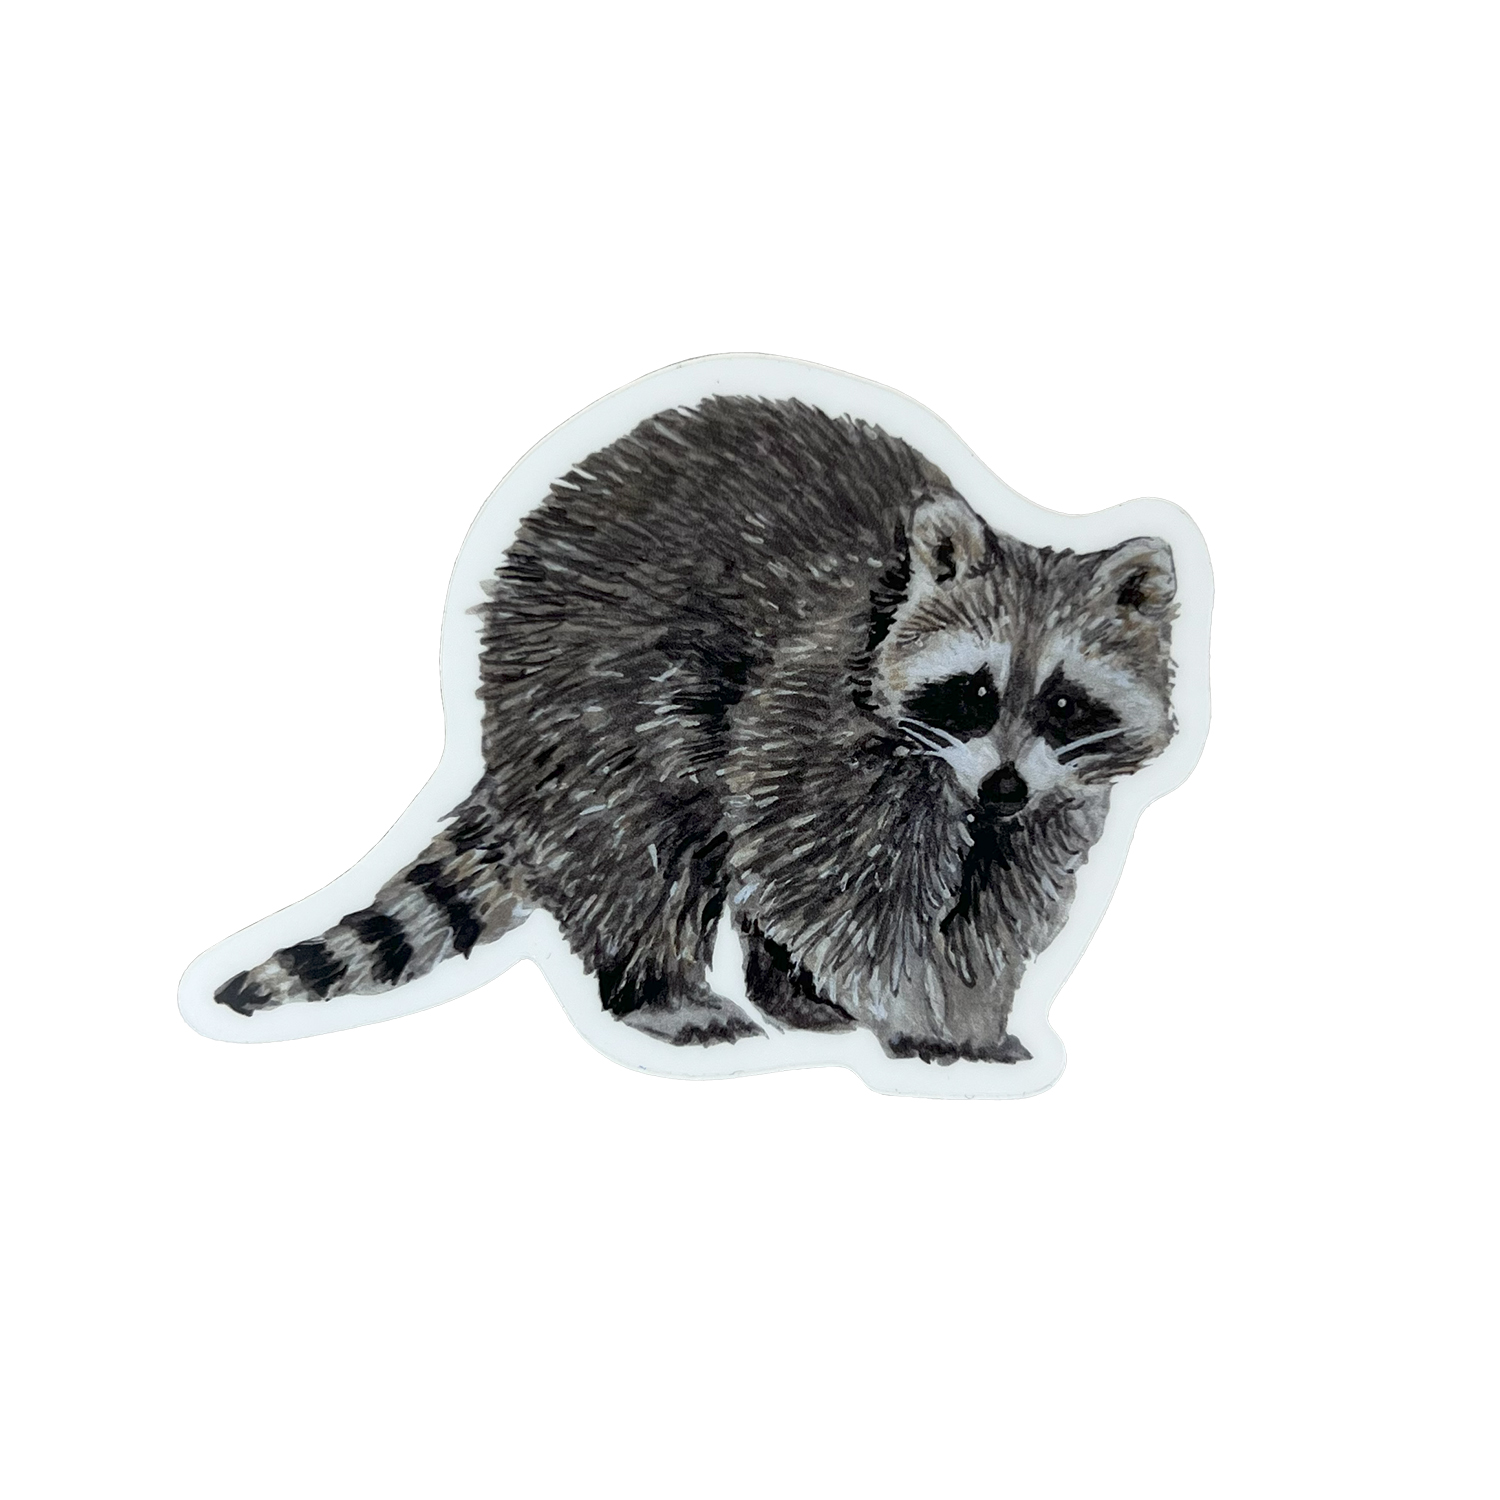 Raccoon Pack Sticker for Sale by lmmanning